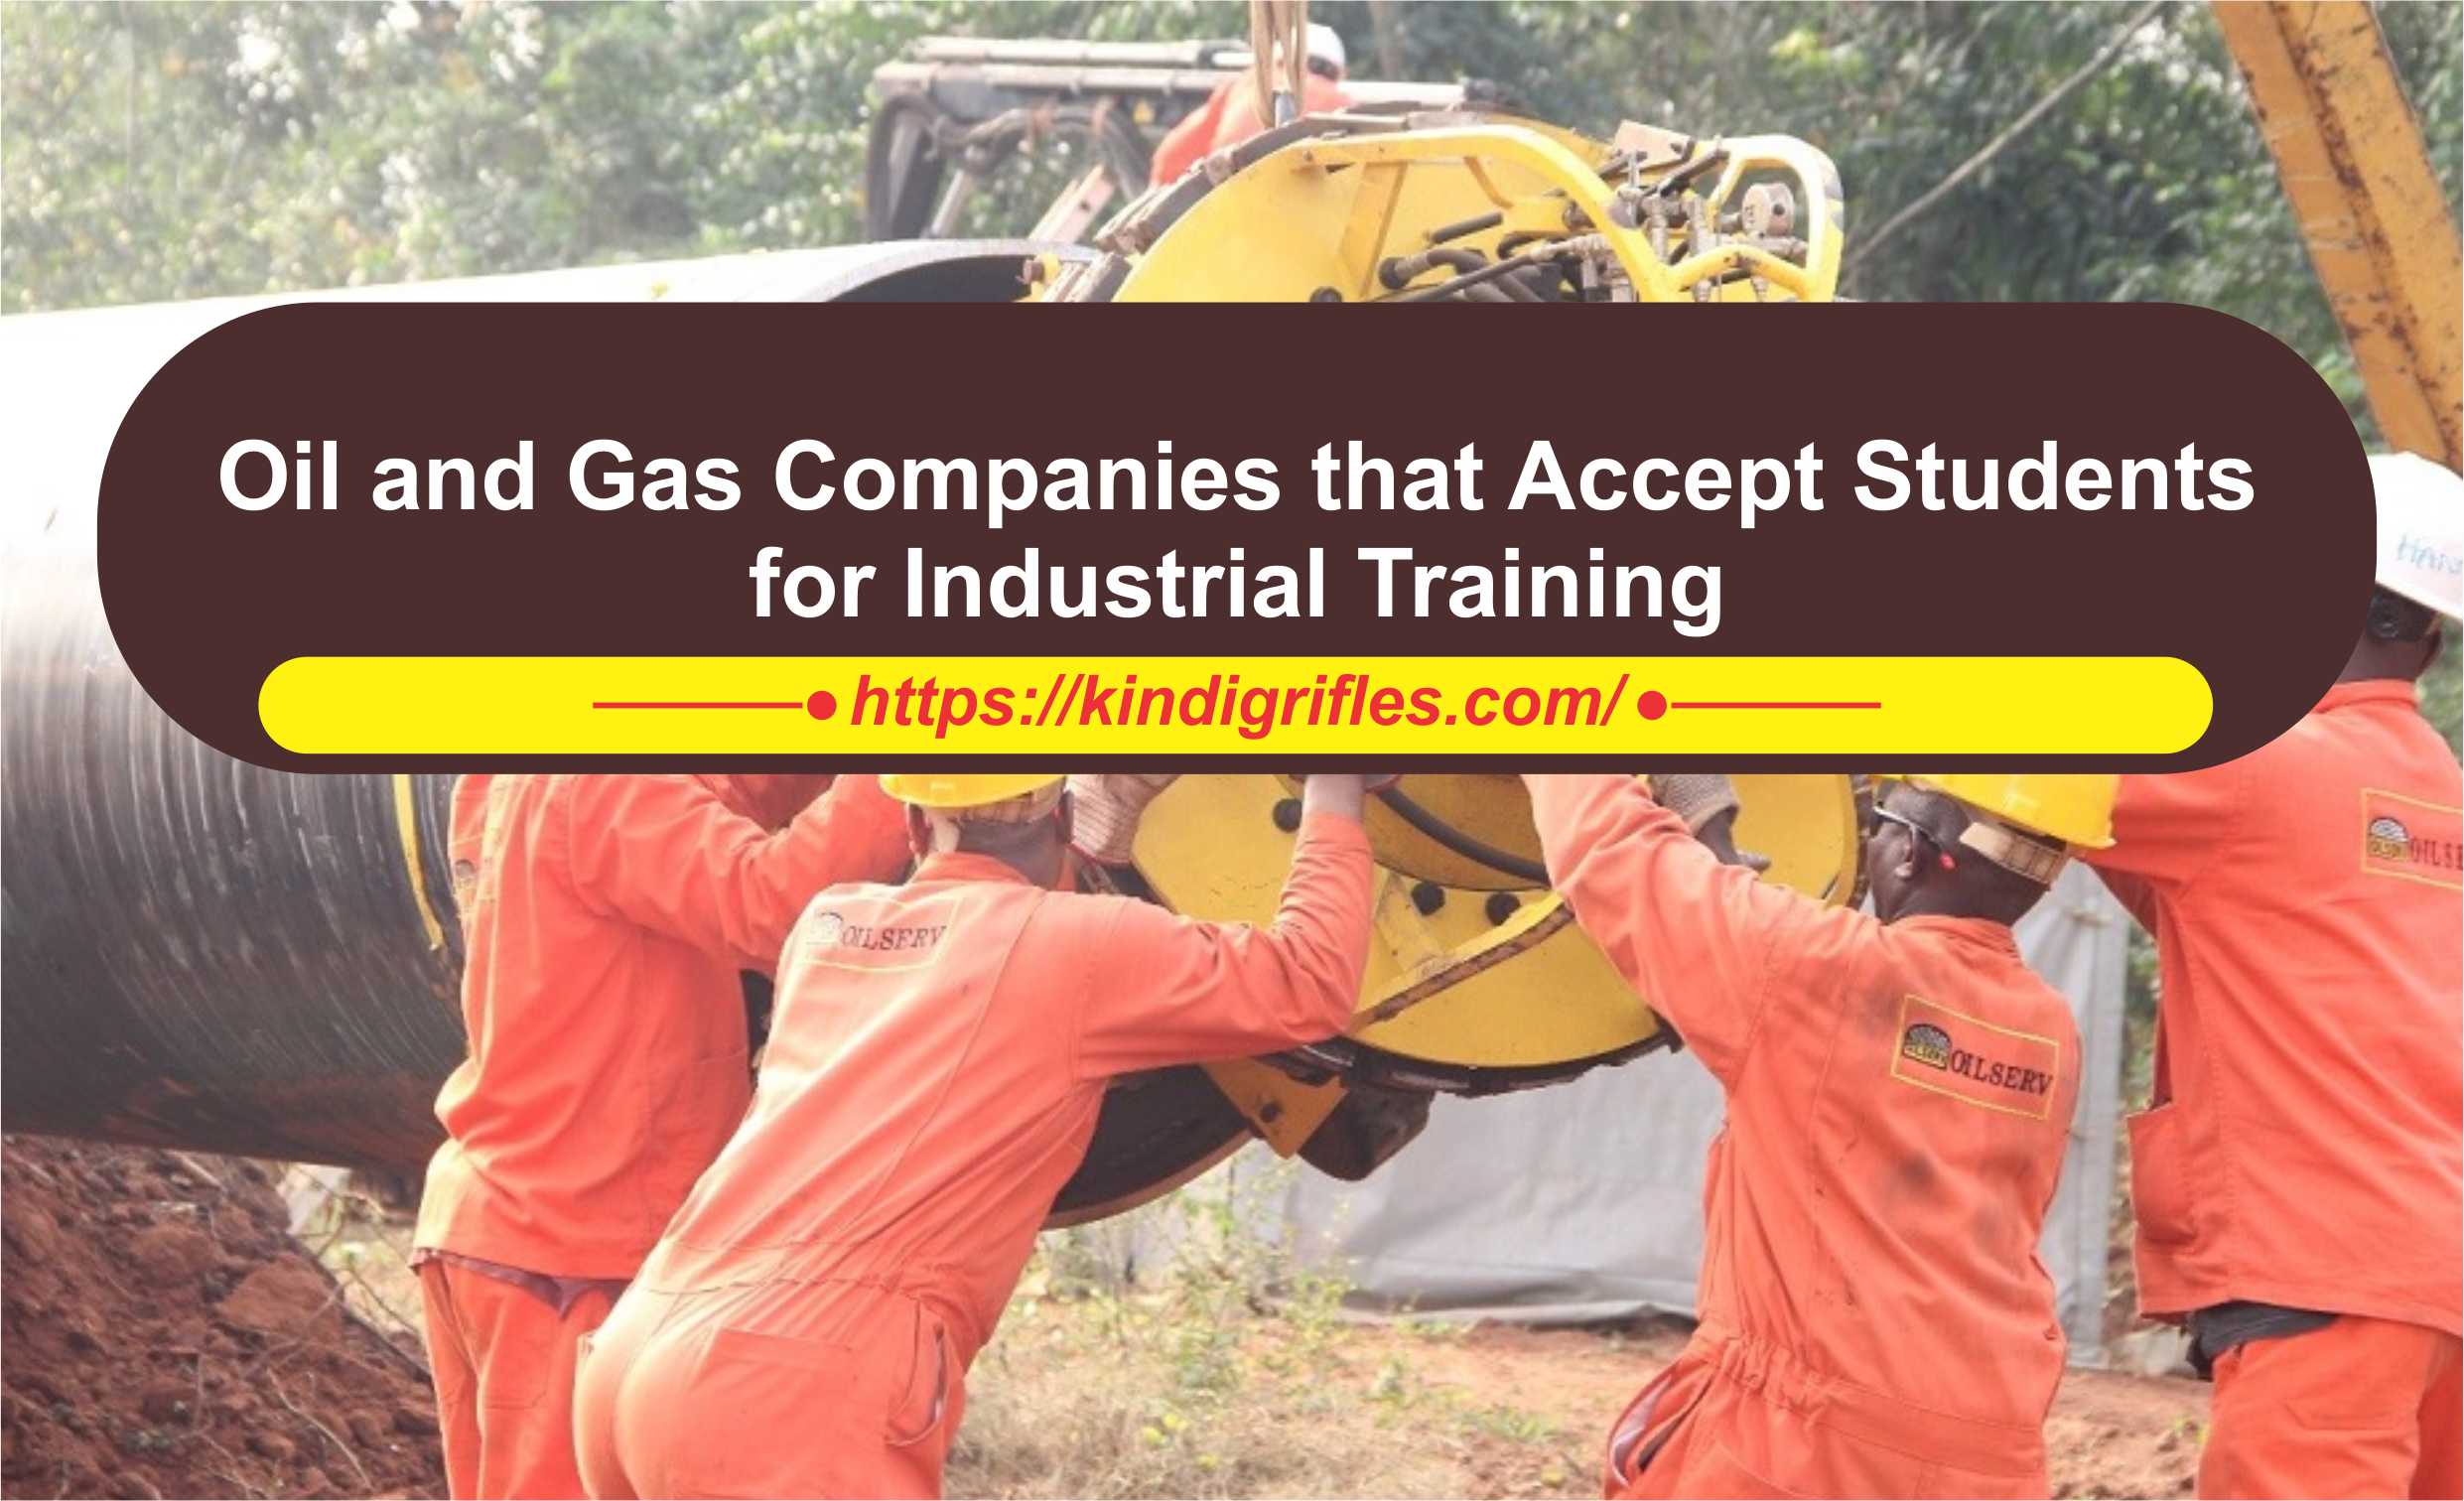 Oil and Gas Companies that Accept Students for Industrial Training2